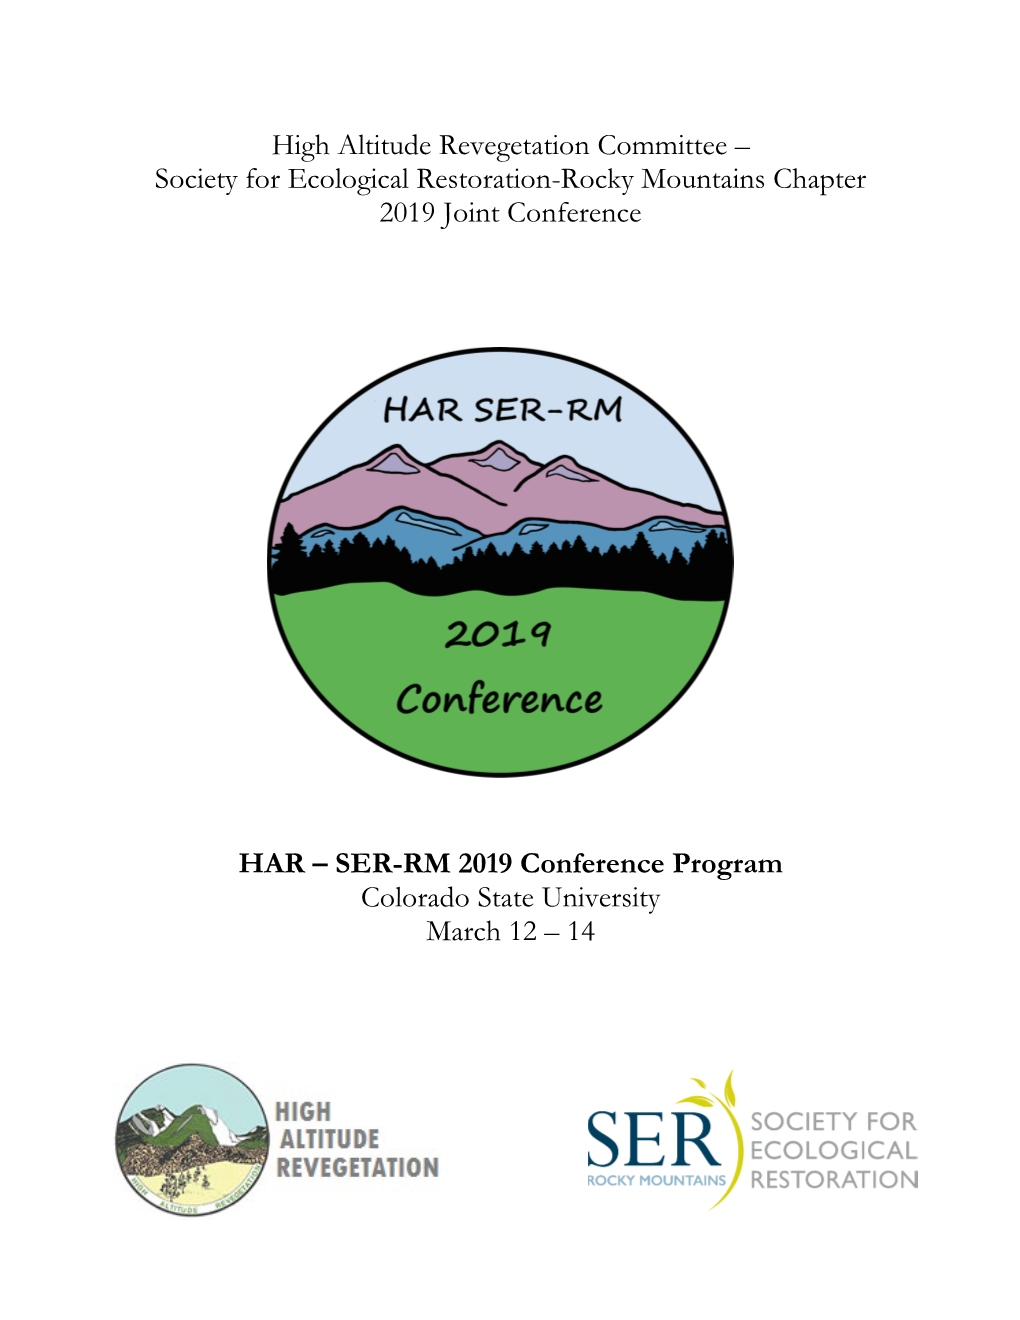 High Altitude Revegetation Committee – Society for Ecological Restoration-Rocky Mountains Chapter 2019 Joint Conference